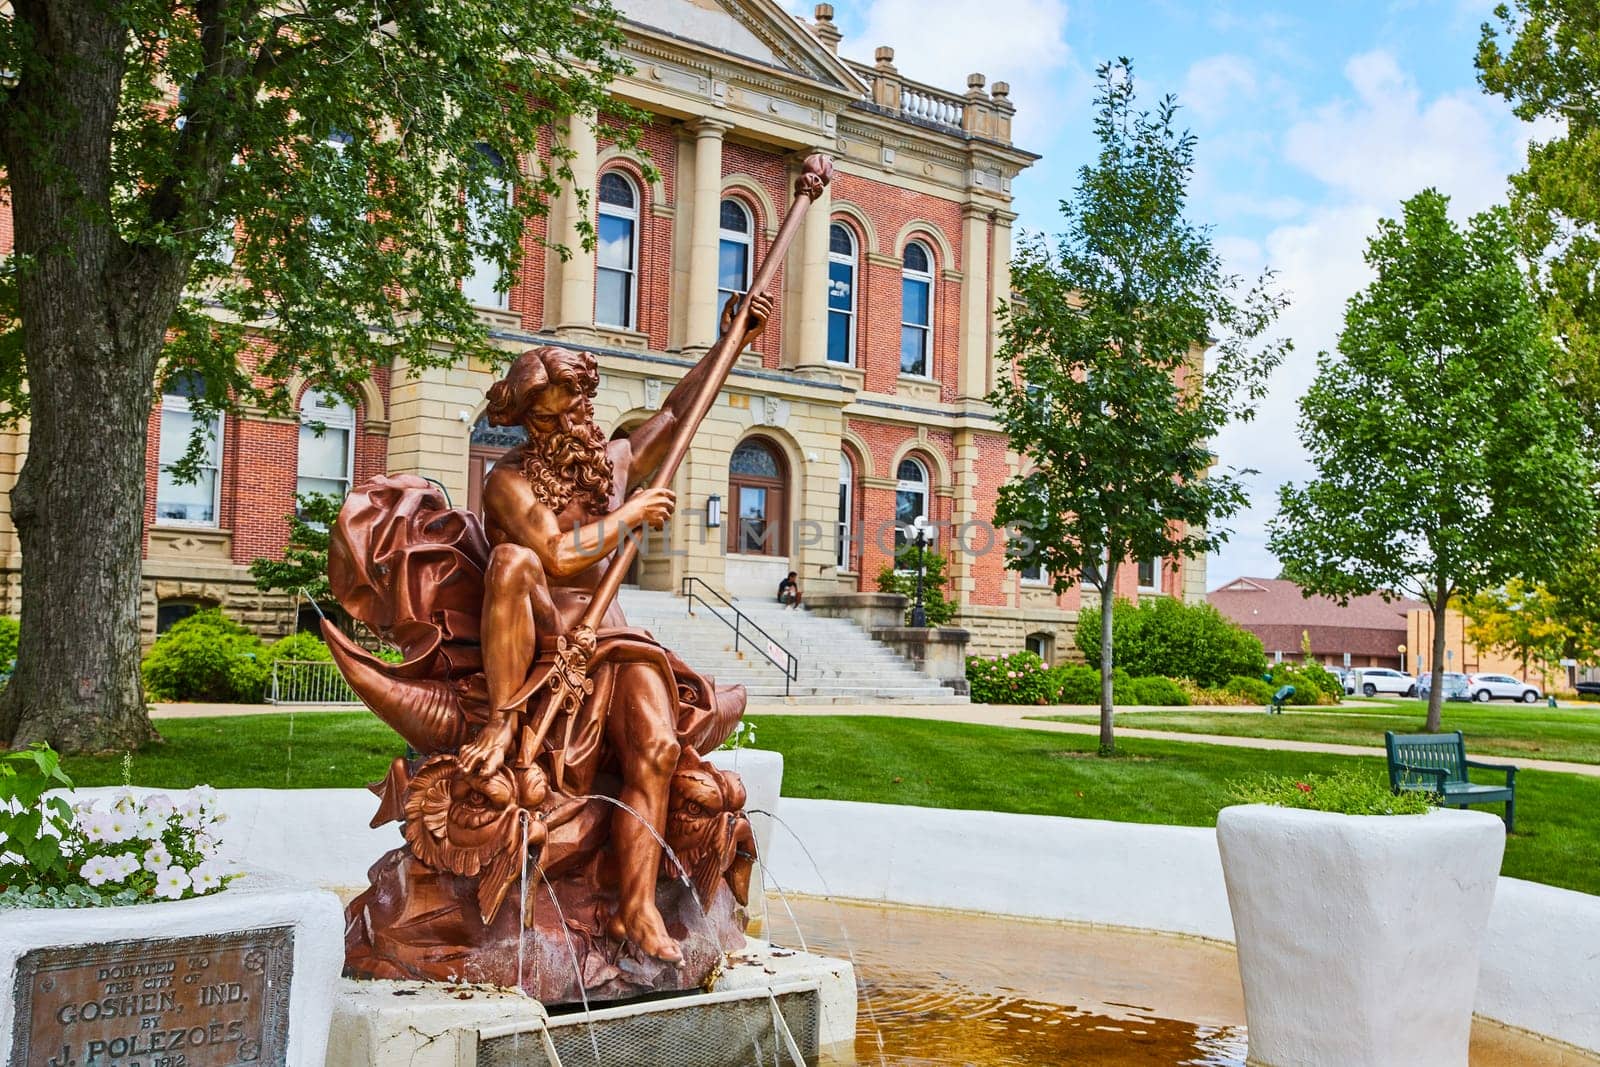 Poseidon bronze statue in yellow fountain at Elkhart County courthouse in summer, law and order, IN by njproductions